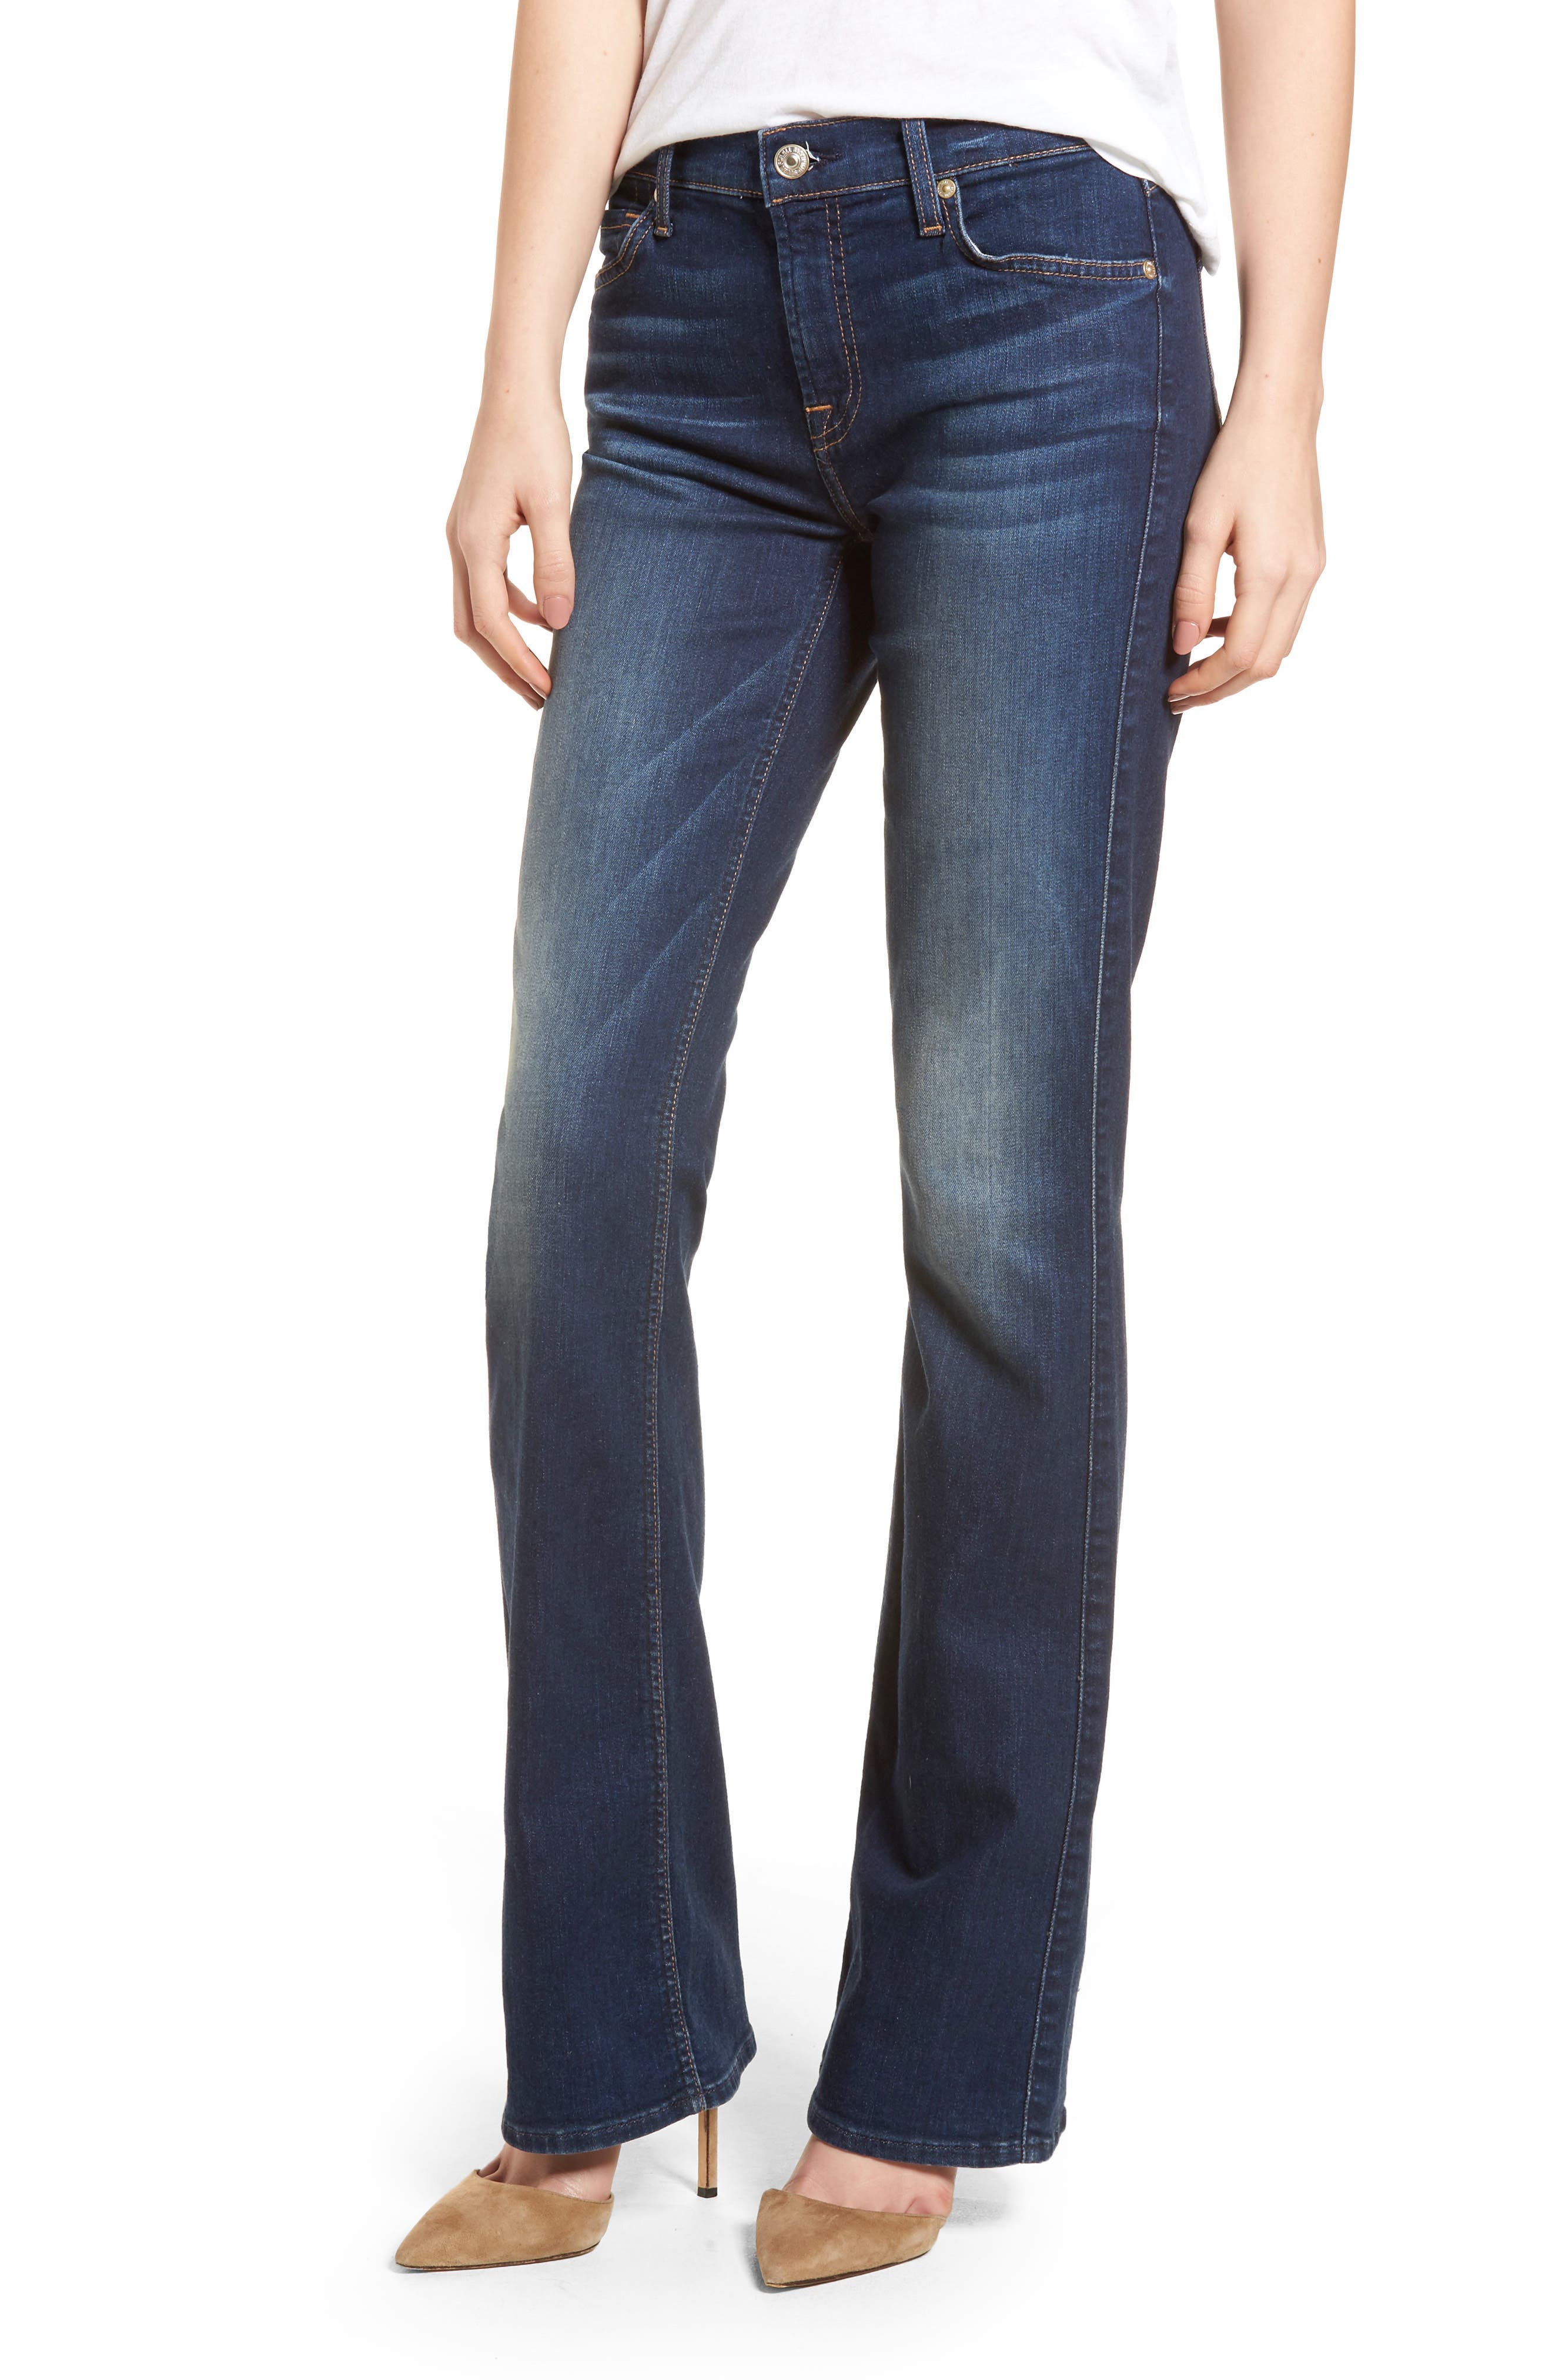 Straight-Cut Jeans 7 FOR ALL MANKIND W27 T 36 Damen Kleidung 7 For All Mankind Damen Jeans 7 For All Mankind Damen Straight-Cut Jeans  7 For All Mankind Damen Straight-Cut Jeans  7 For All Mankind Damen blau 